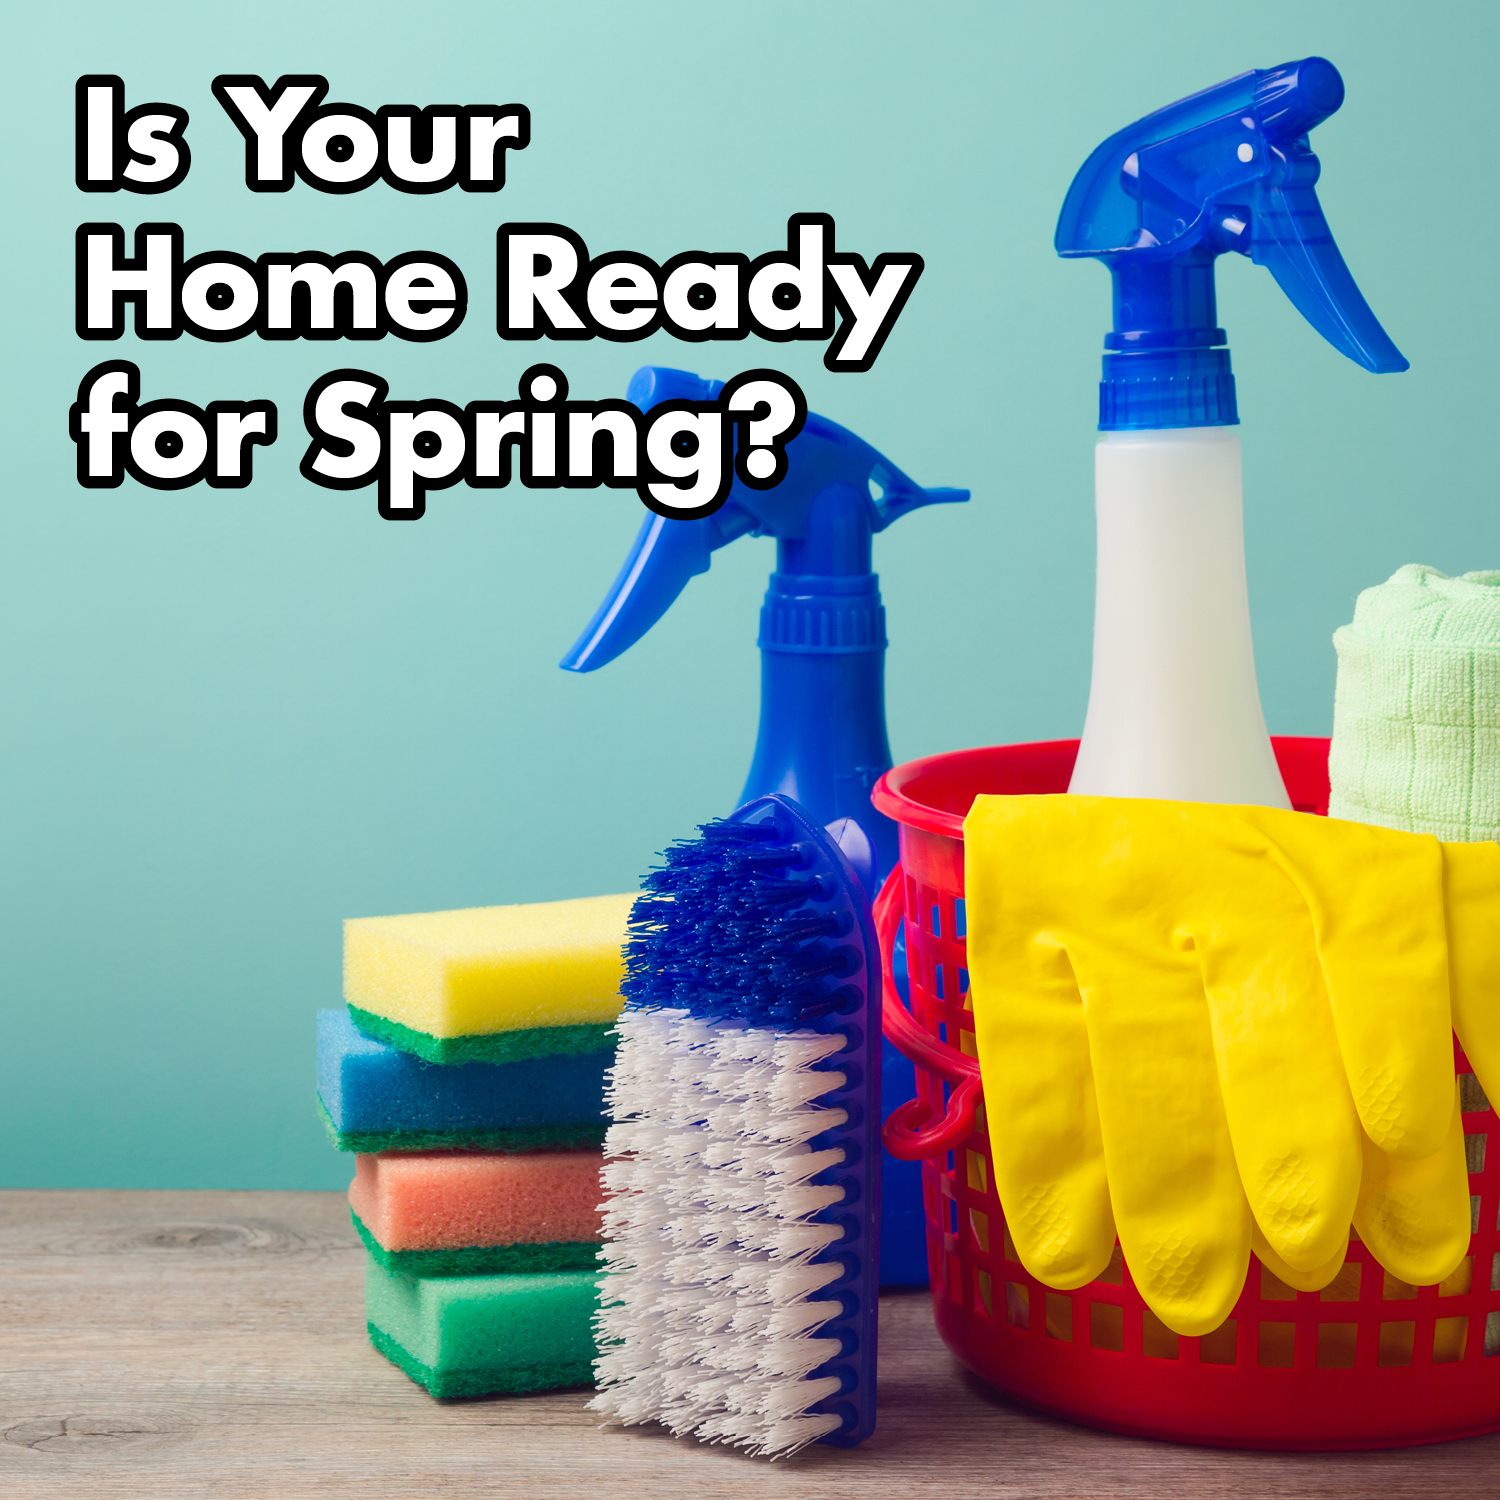 "Is Your Home Ready for Spring" over Bucket of Cleaning Supplies